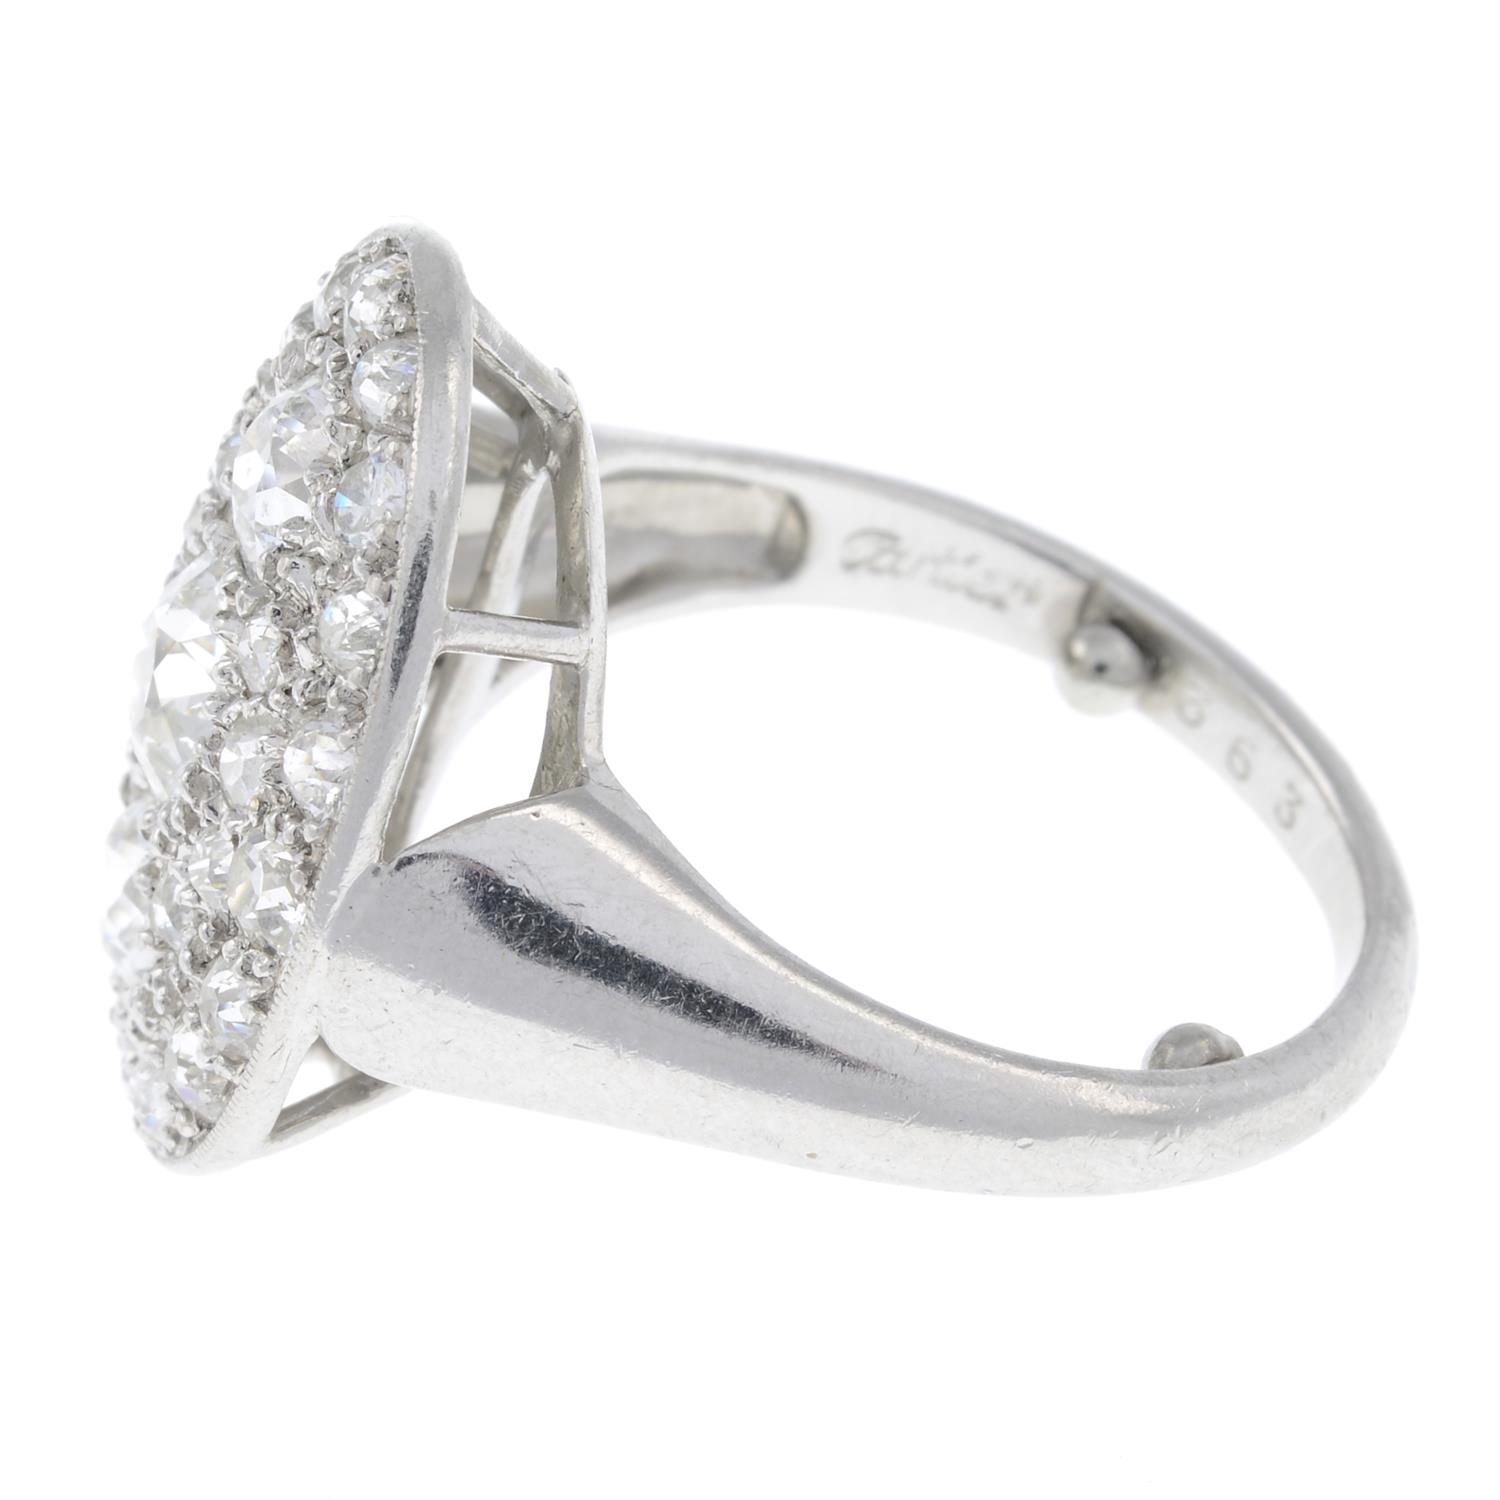 Diamond dress ring, by Cartier - Image 5 of 5